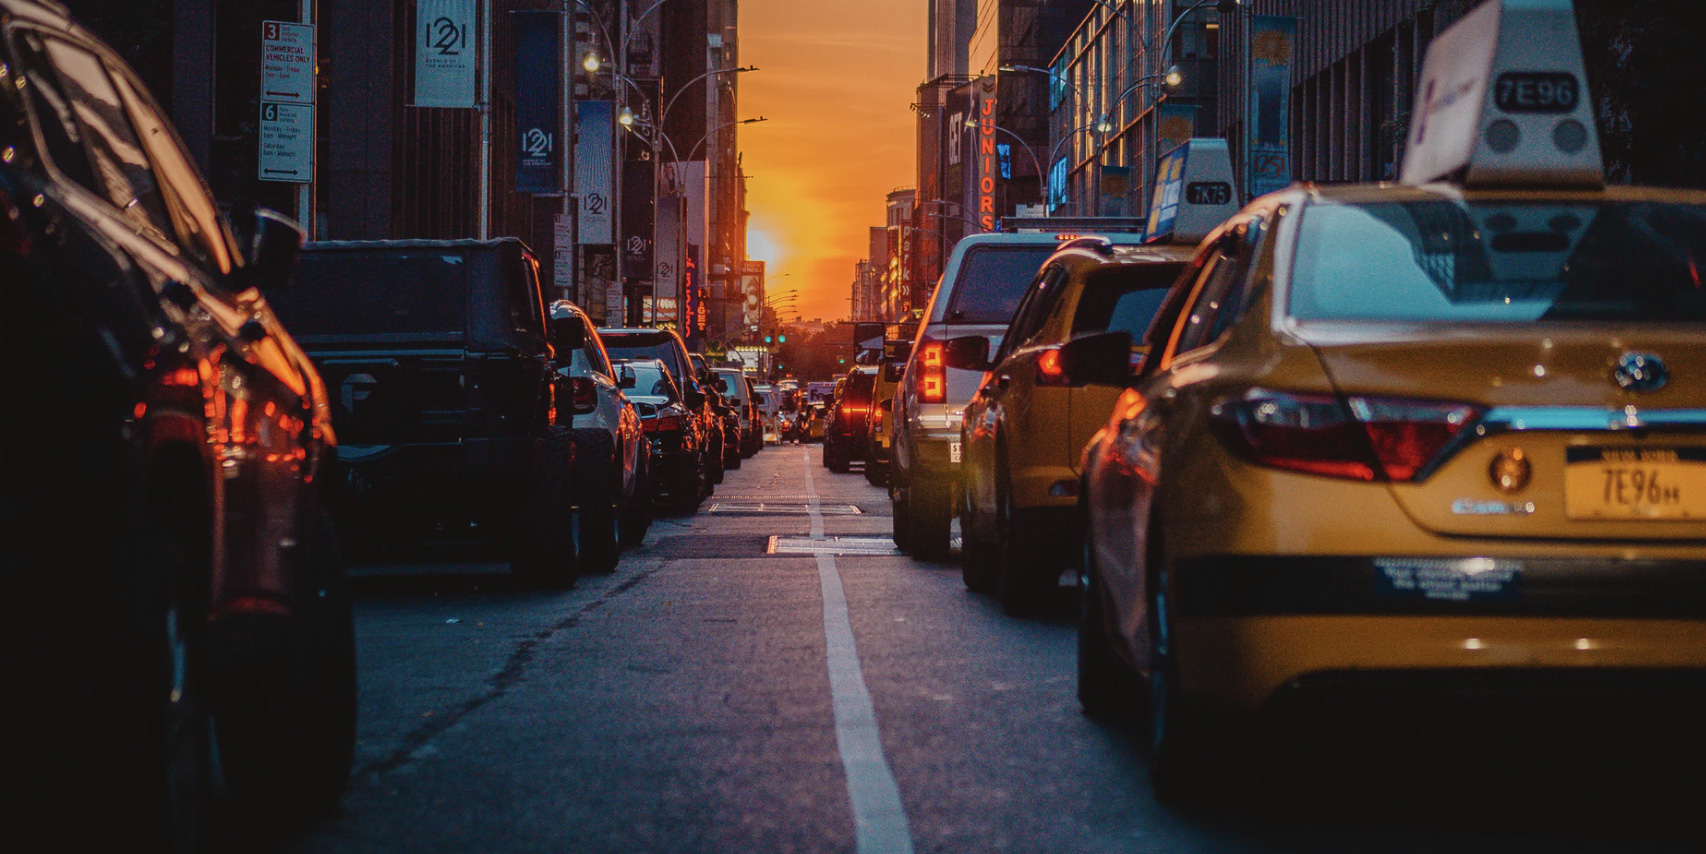 A street view, cars on the road, sunset background